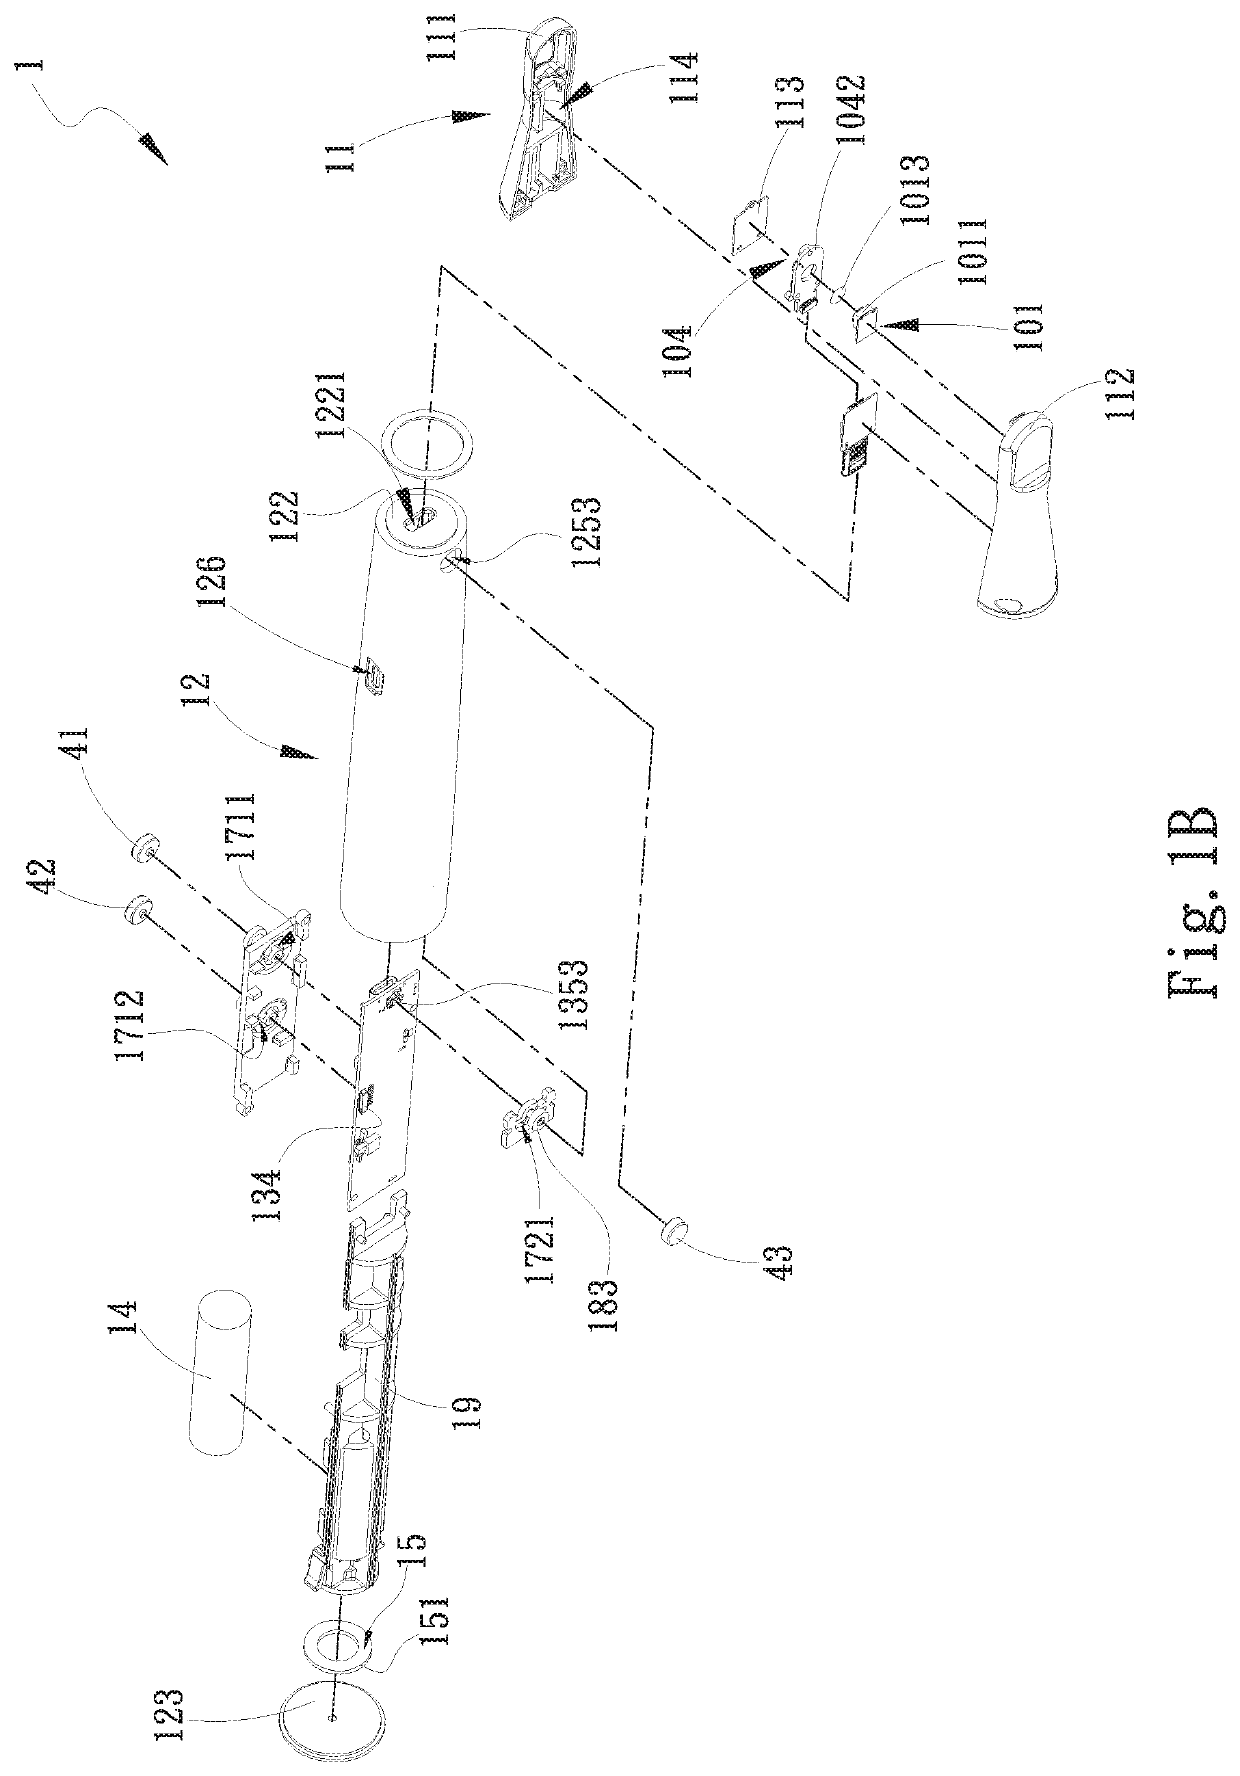 Oral screening device having a replaceable screening head